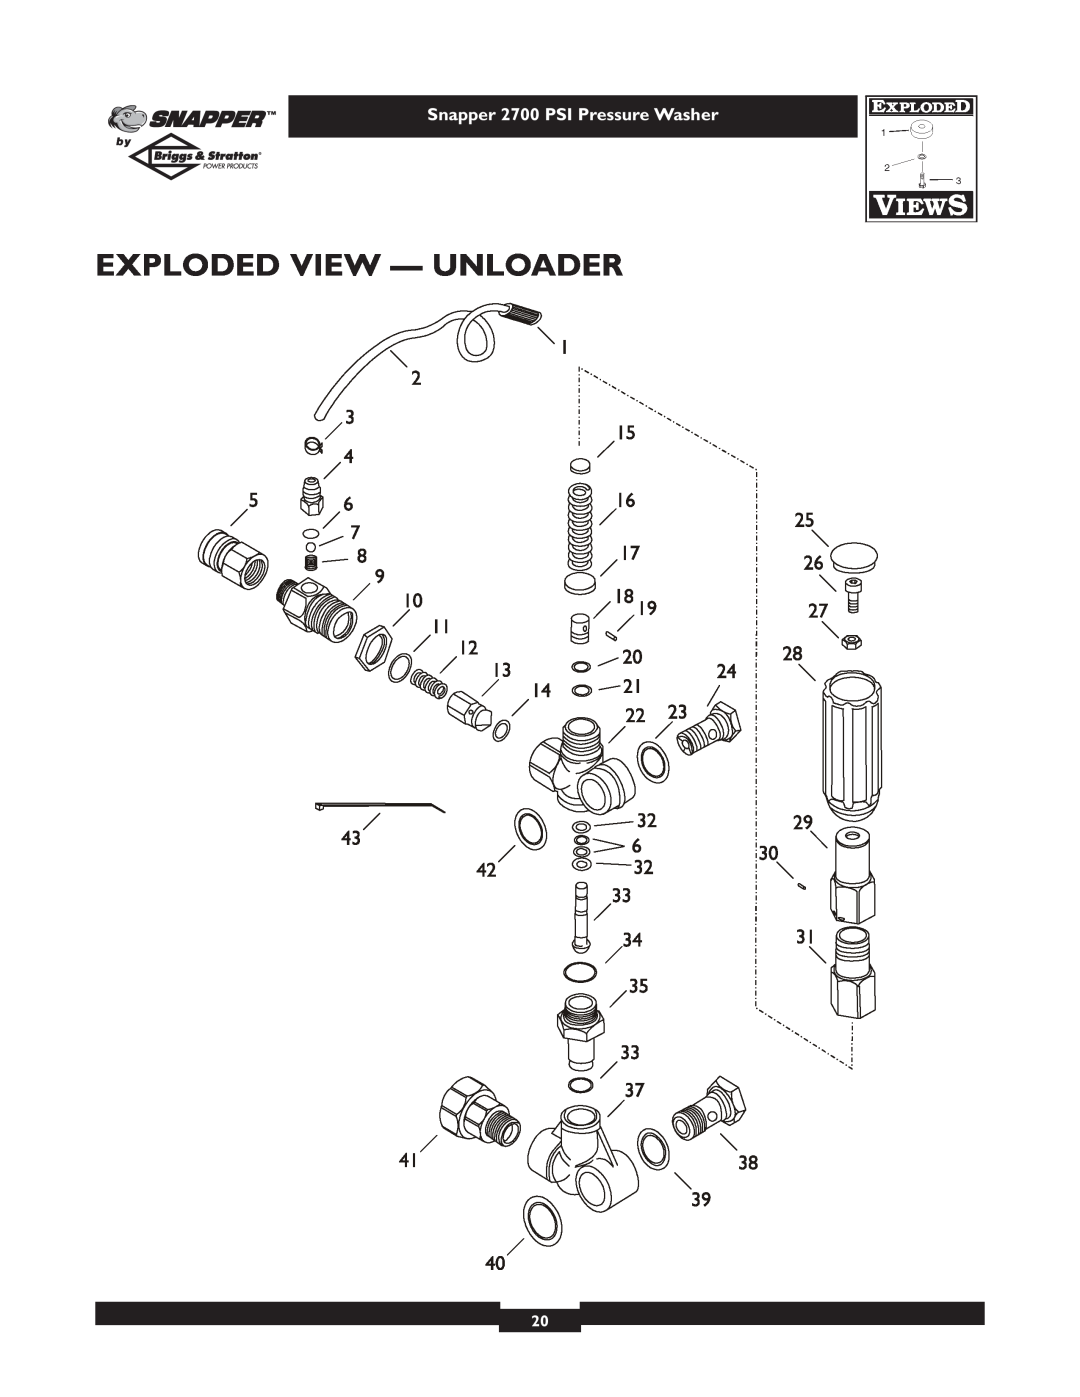 Briggs & Stratton 2700PSI owner manual Exploded View - Unloader, Snapper 2700 PSI Pressure Washer 